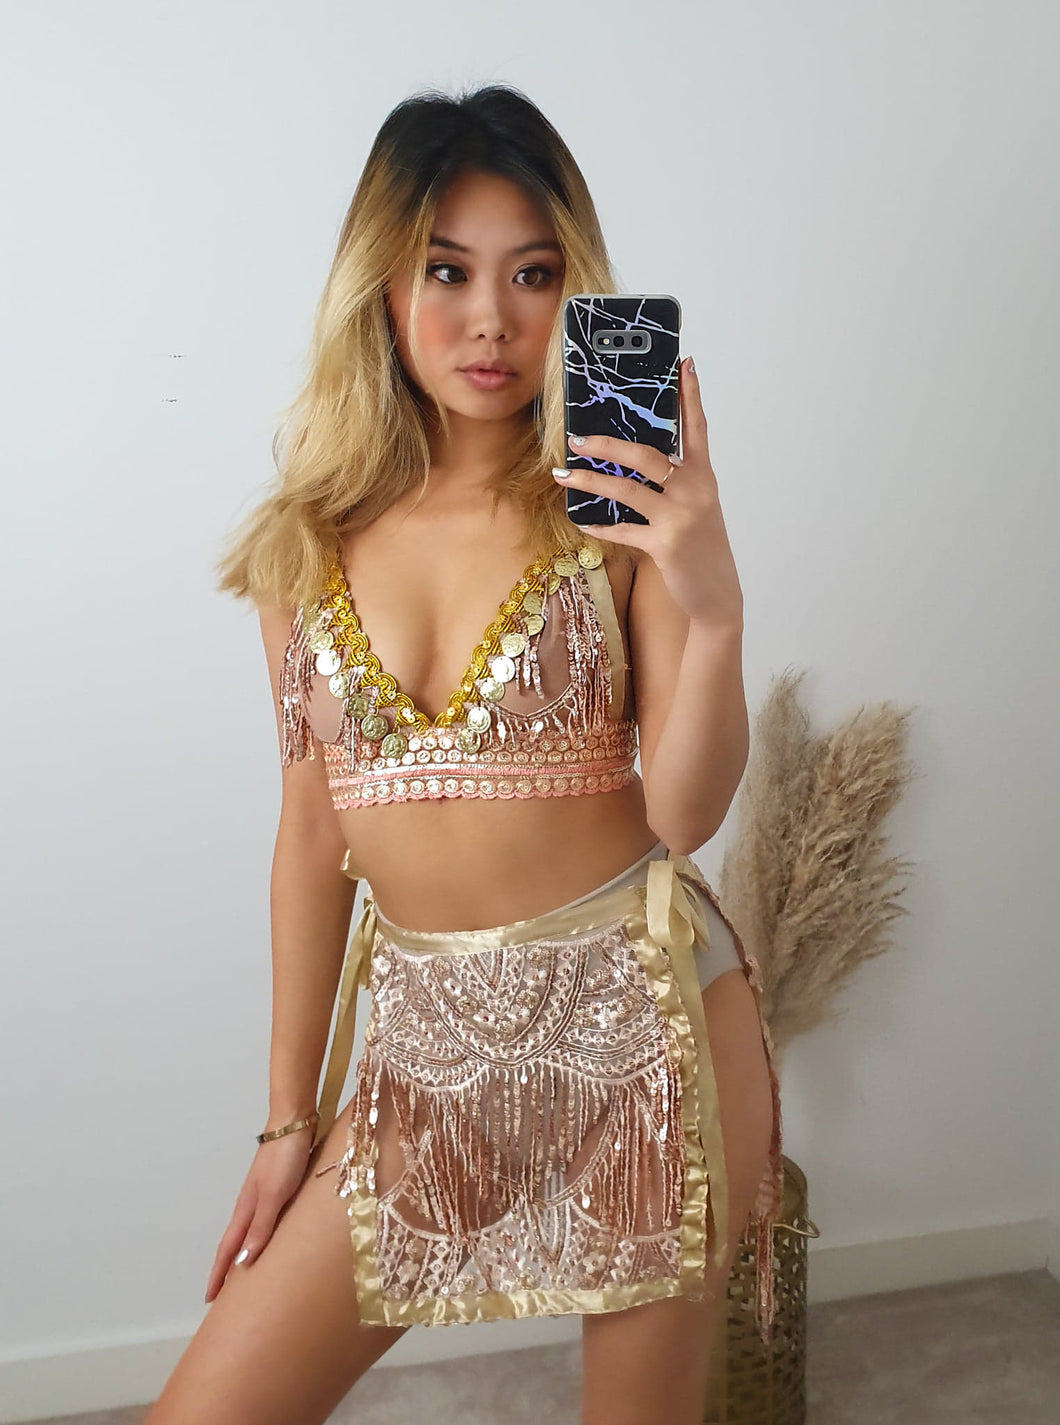 Warrior Princess ananacatering halloween costume triangle bra 3 piece co ord set  - ananacatering - ananacateringLithuania - Handmade luxury dragon satin chinese unique womens clothing lace mesh prom dress festival crop top sequin bodychain dolls kill depop shopify silkfred chelsea pearl li bralet lili pearl